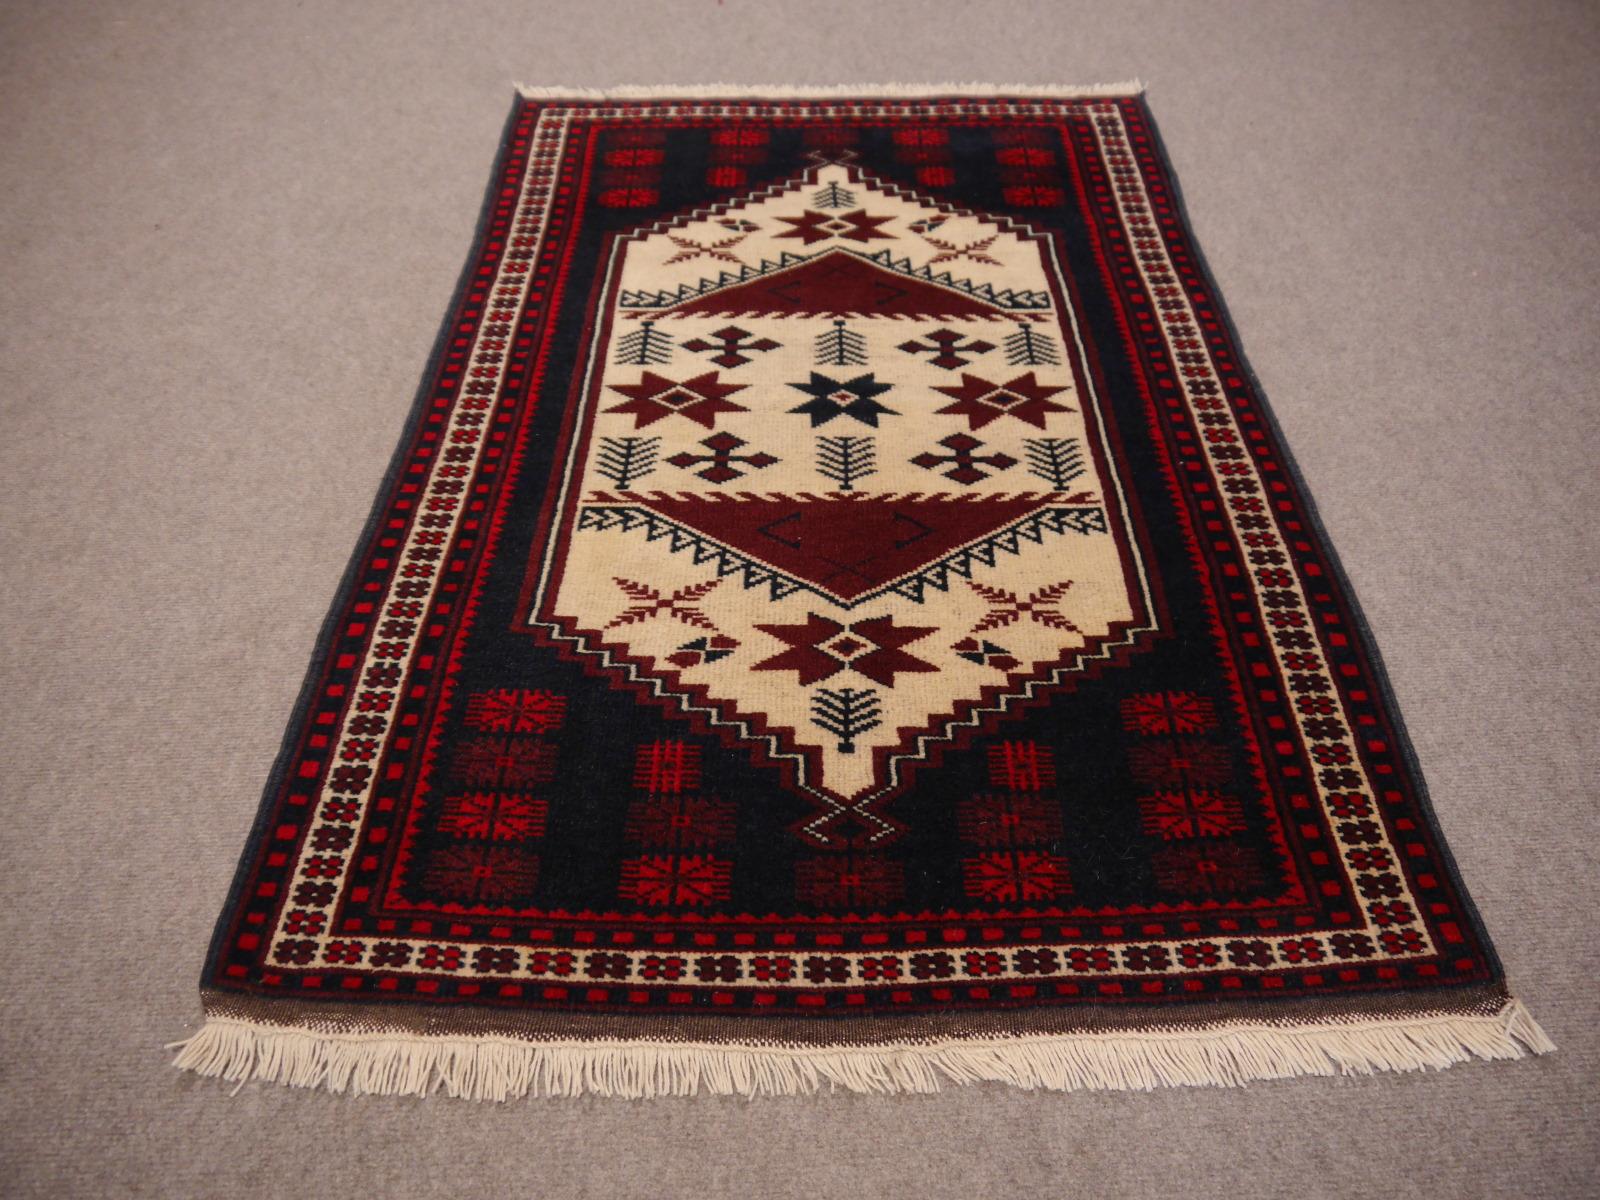 Vintage oriental accent rug, carpet, mat

Vintage Turkish rug slightly worn distressed Industrial look

• Beautiful vintage rug
• All handmade
• Pile pure wool
• Traditional design
• Condition: Very good, some low pile.

All of our rugs, carpets and